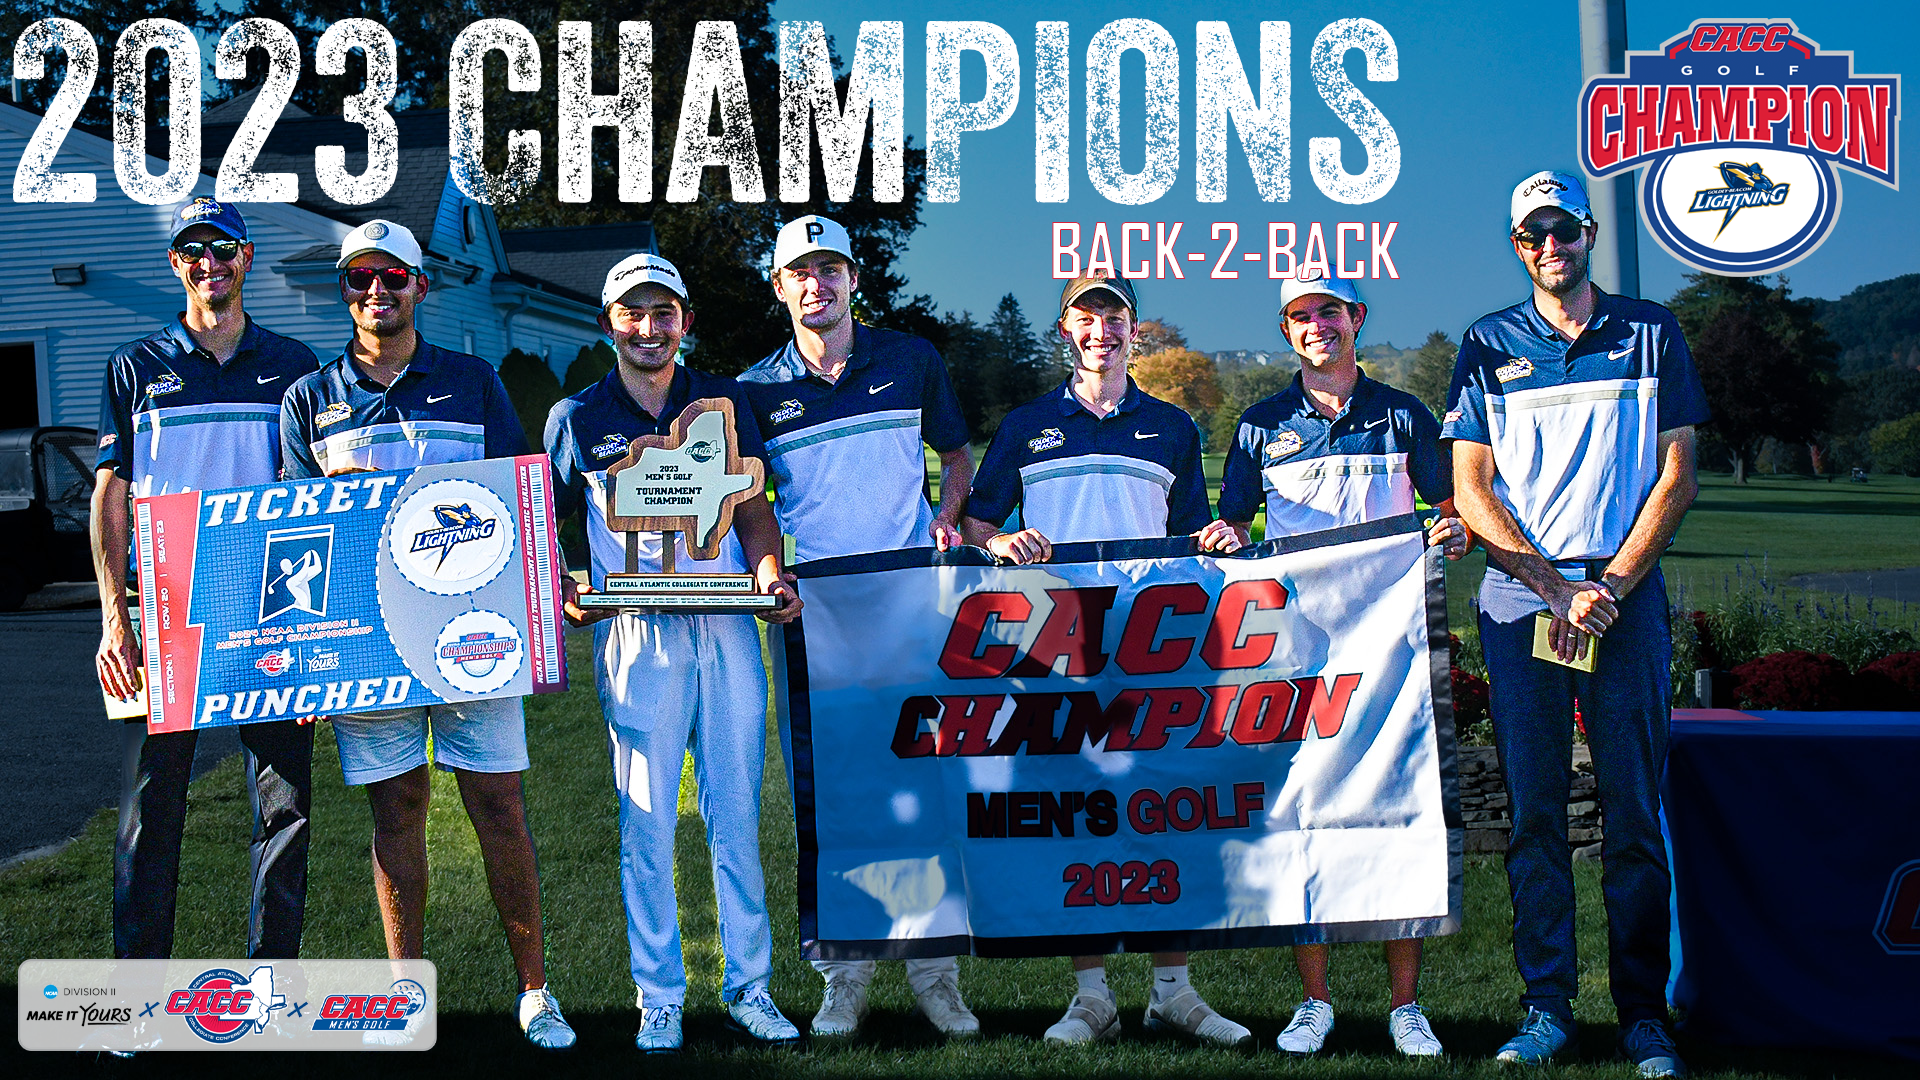 Koch Wins Individual Playoff but G-B Rallies for Team Title at 2023 CACC Golf Championship